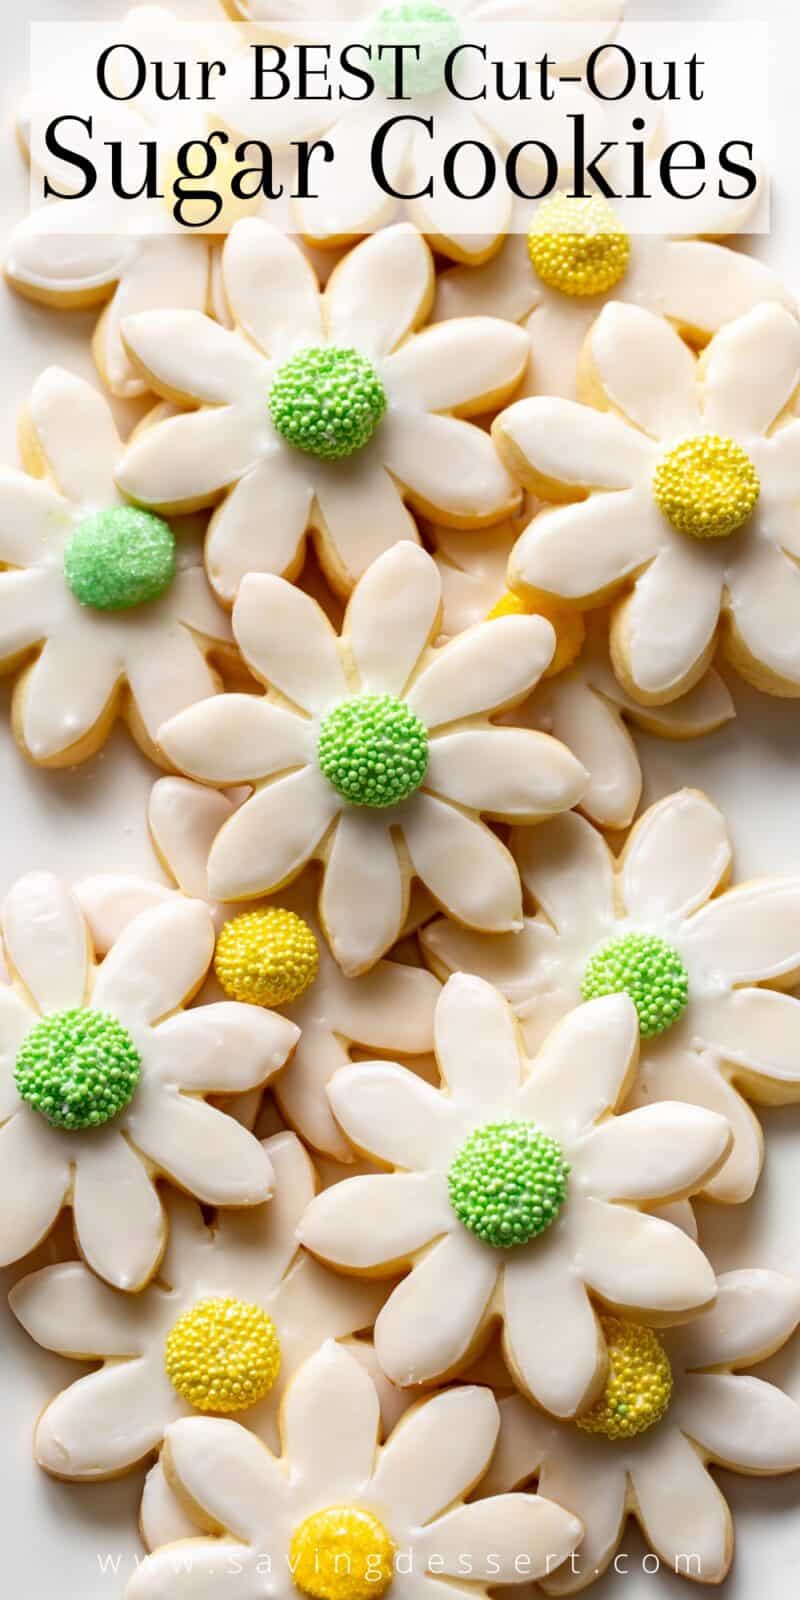 An overhead view of a platter of cut-out sugar cookies shaped like flowers